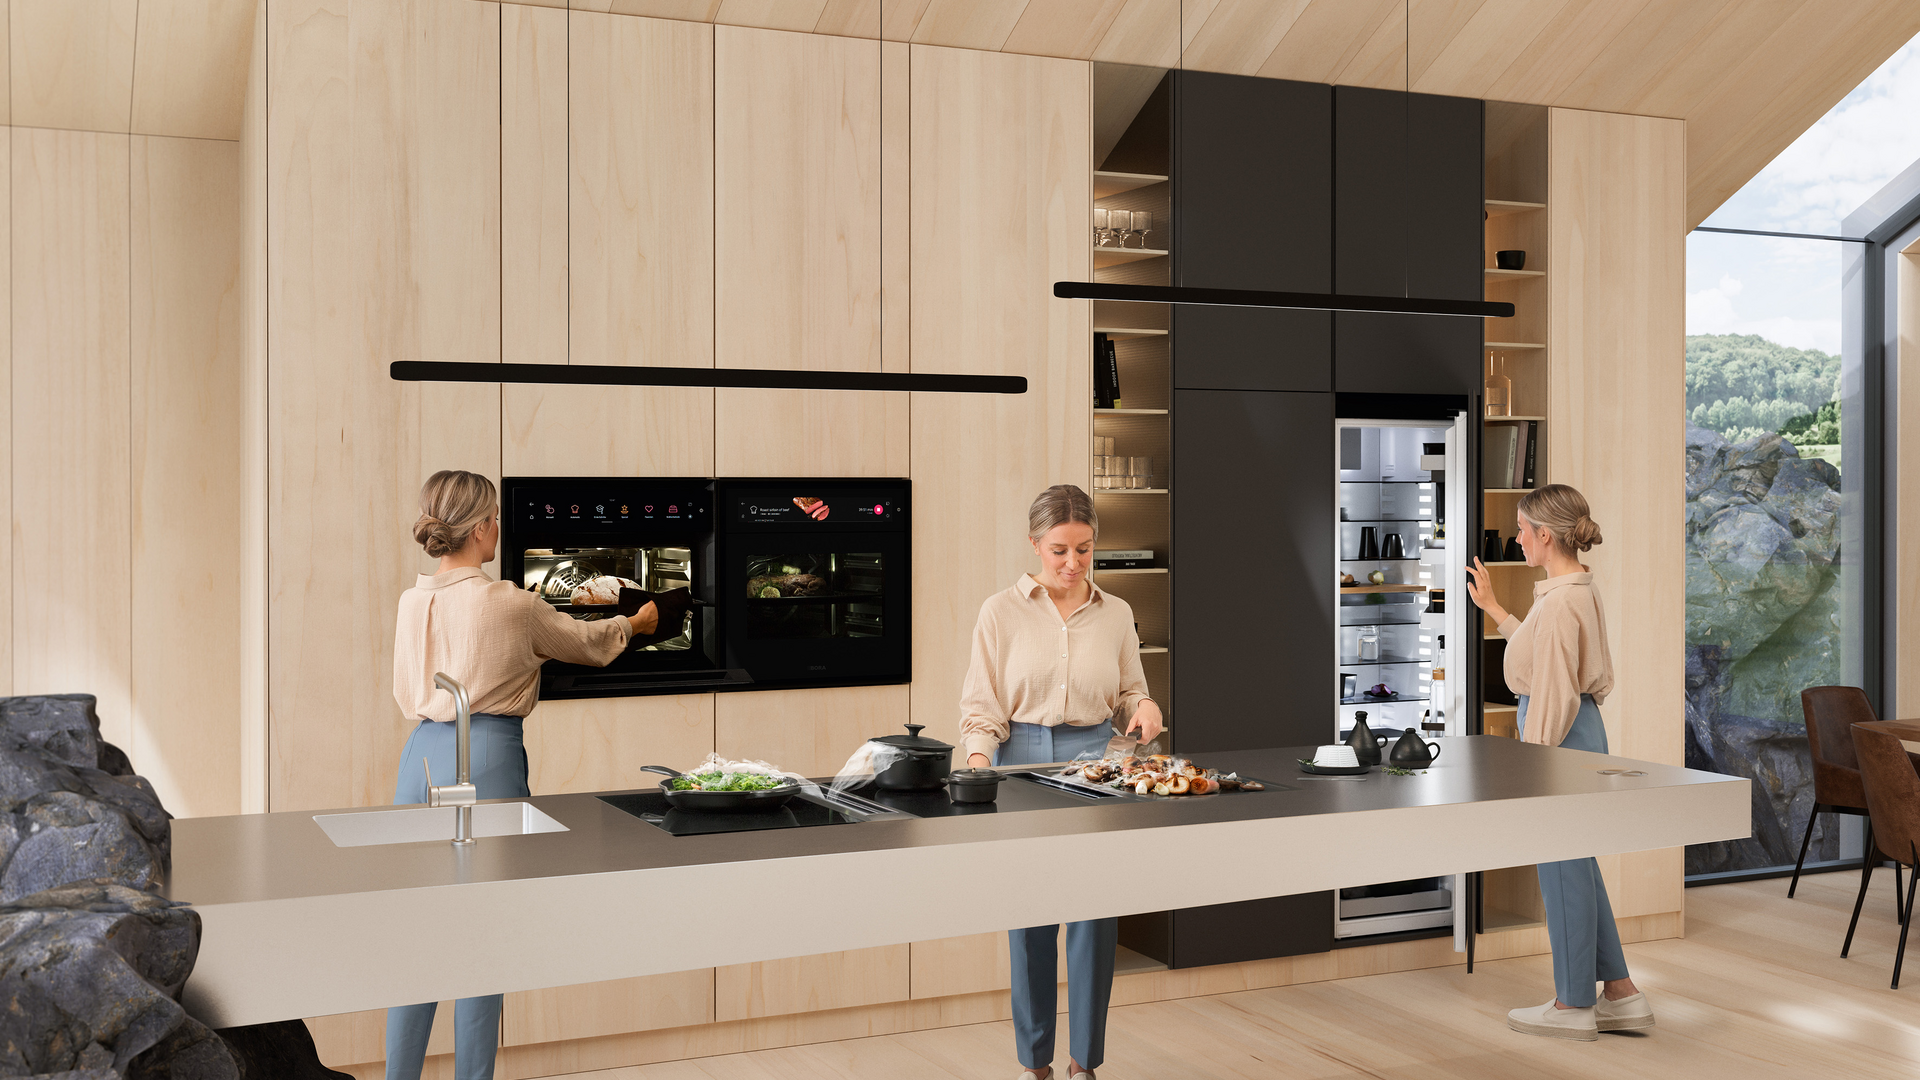 BORA offers ‘more than cooking’: the company is presenting a comprehensive product range expansion at the inaugural BORA Experience Days